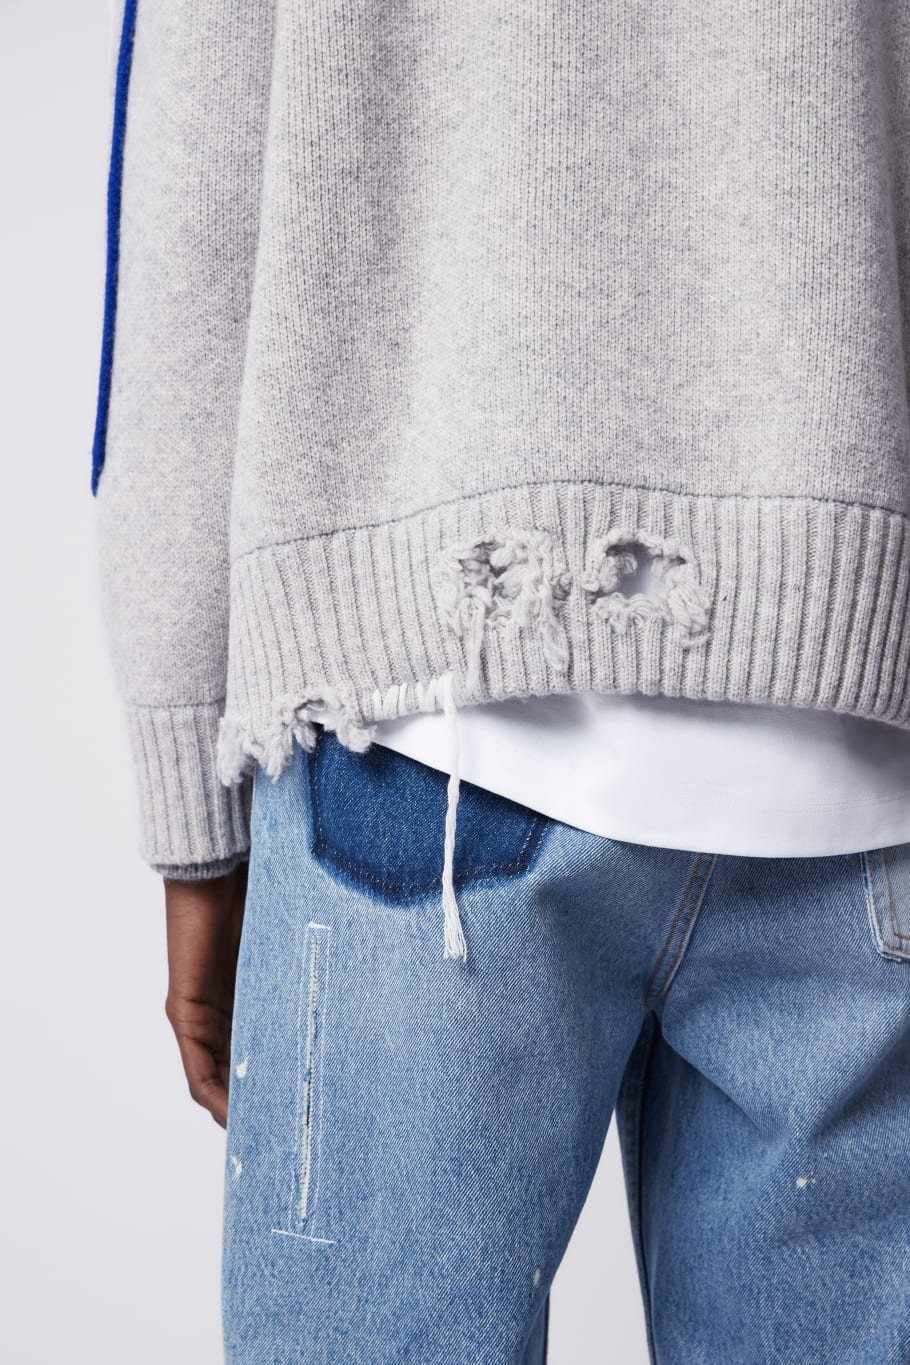 Ader Error and Zara Team Up for Expansive New AZ Collection | Complex